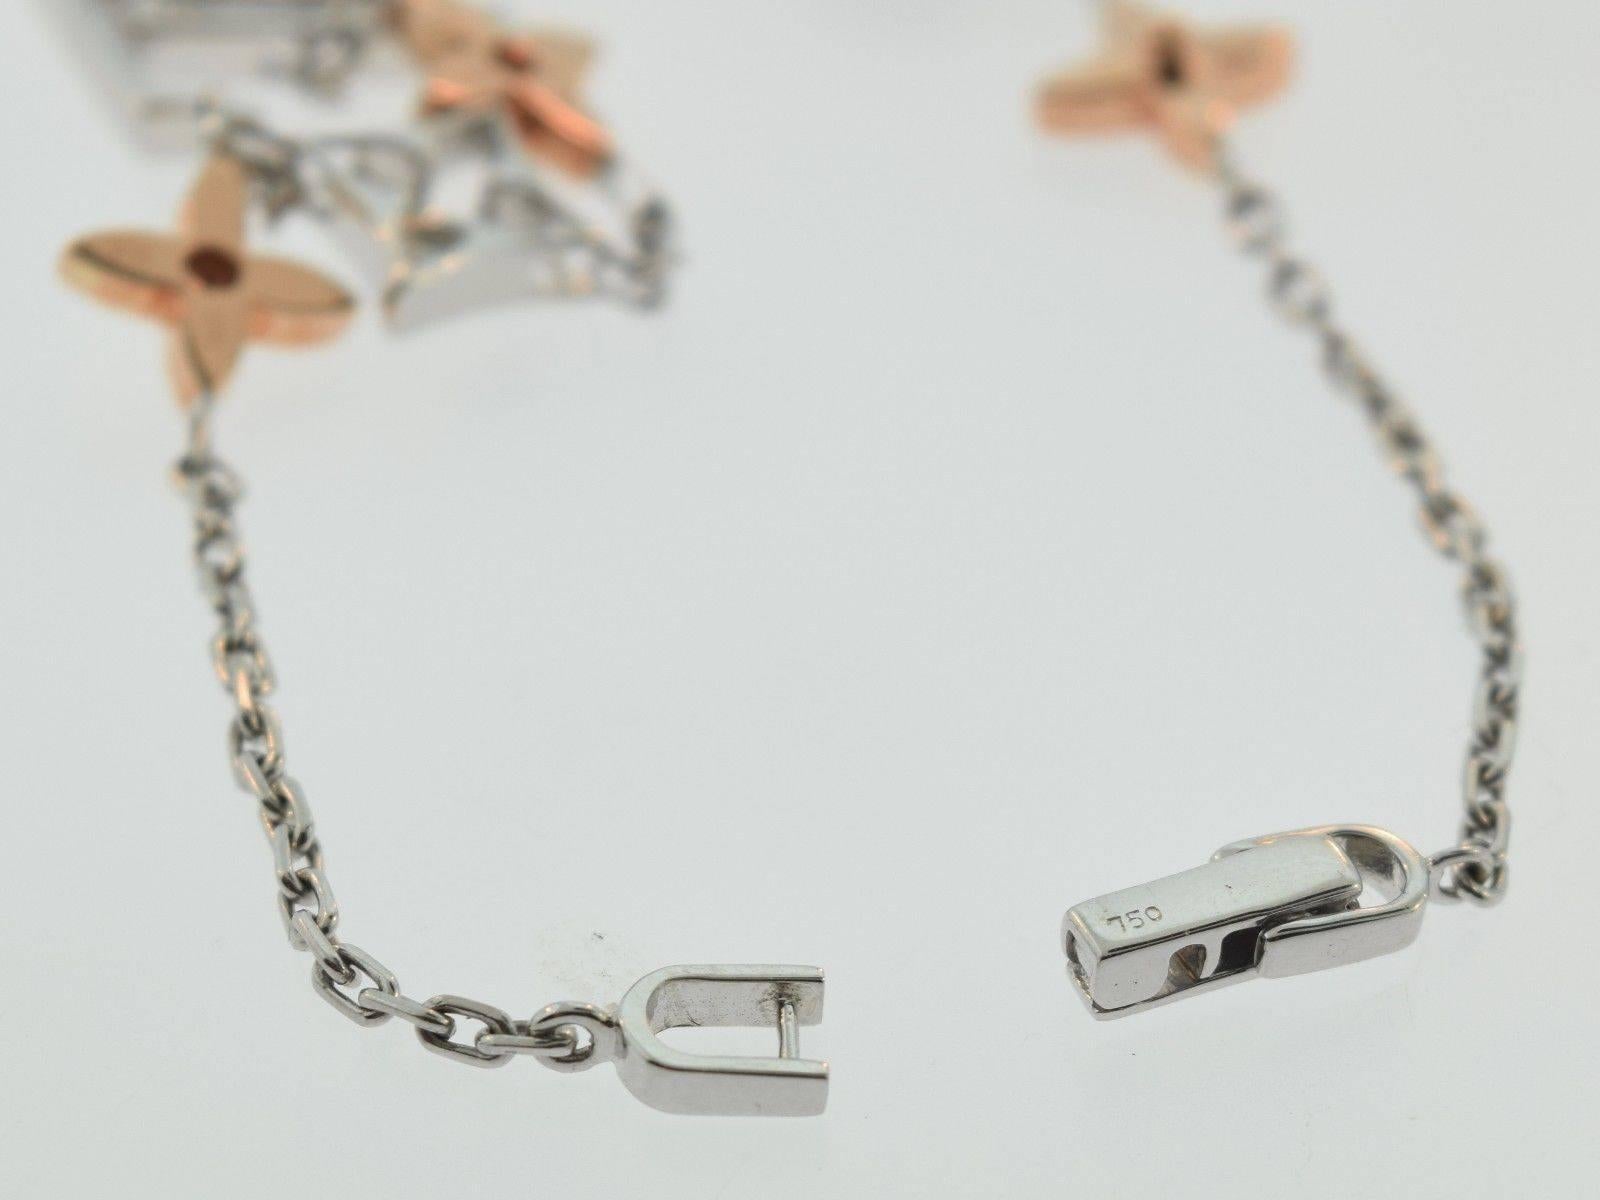 About the Item:
Feminine and playful, the Idylle Blossom collection brings life to the Monogram flowers, created in 1896 by Georges-Louis Vuitton. Blooming in white and rose gold, this exquisite bracelet joyfully combines in a personal precious